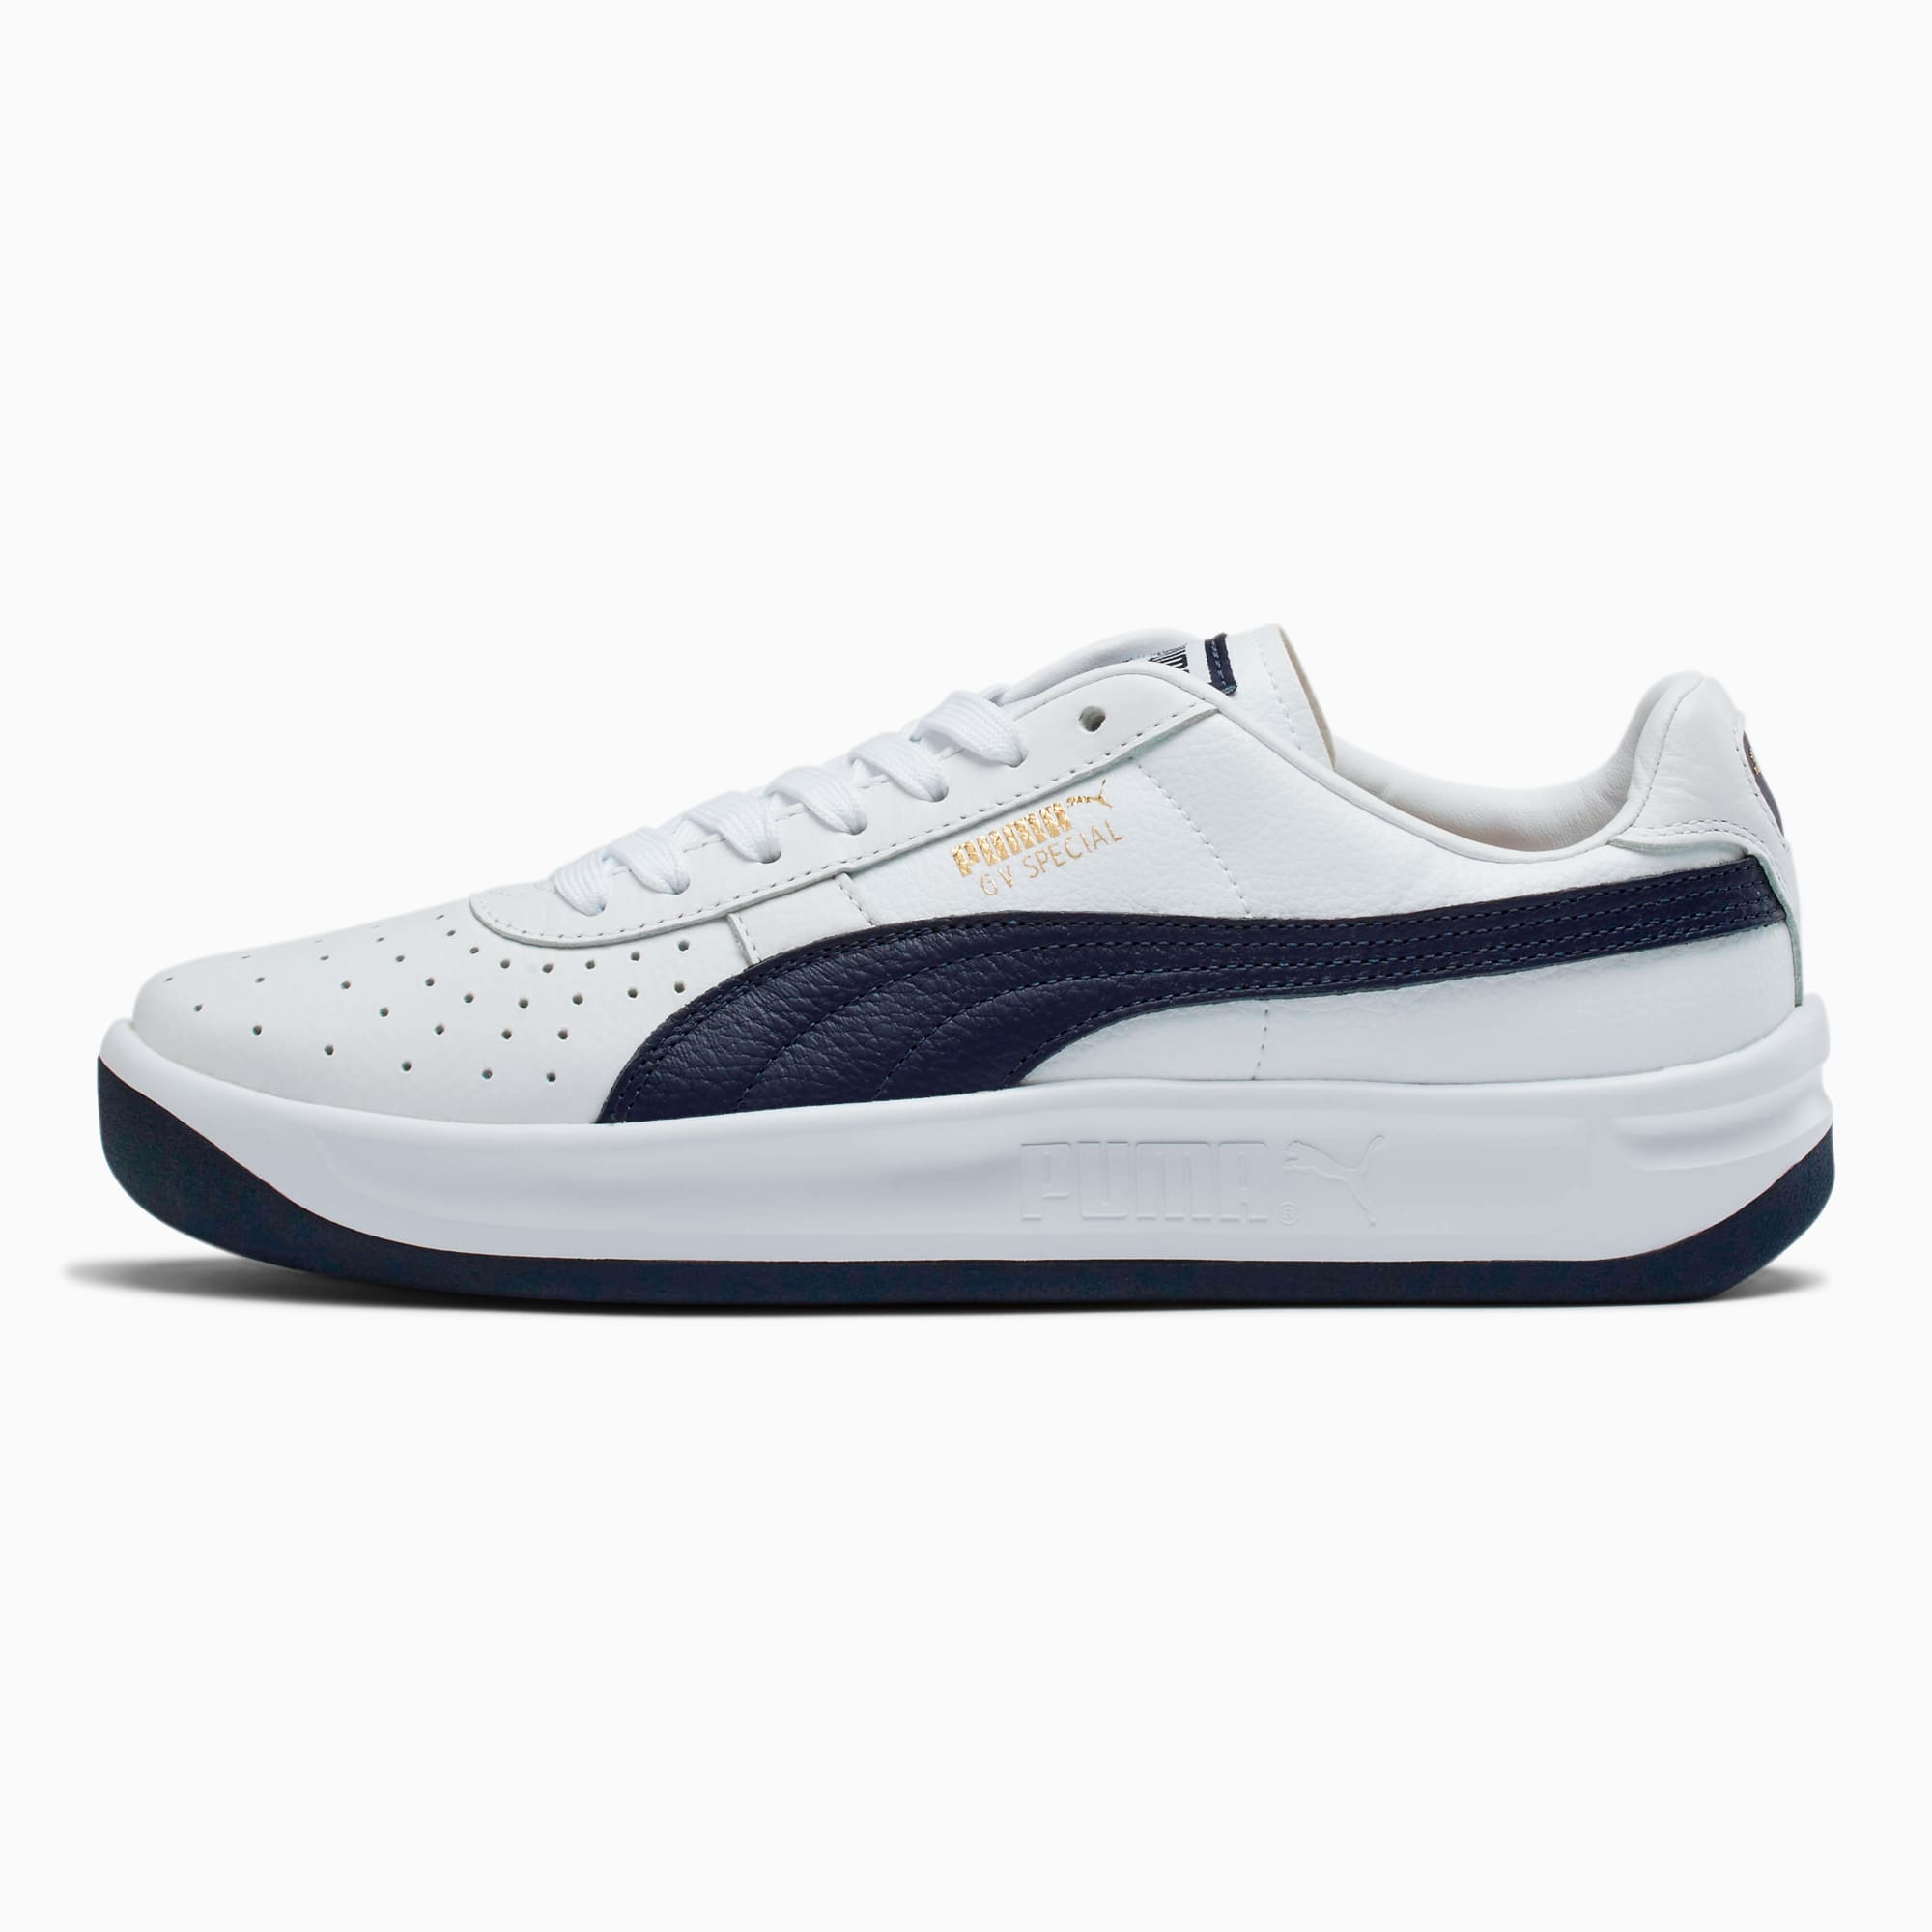 GV Special+ Sneakers | PUMA US